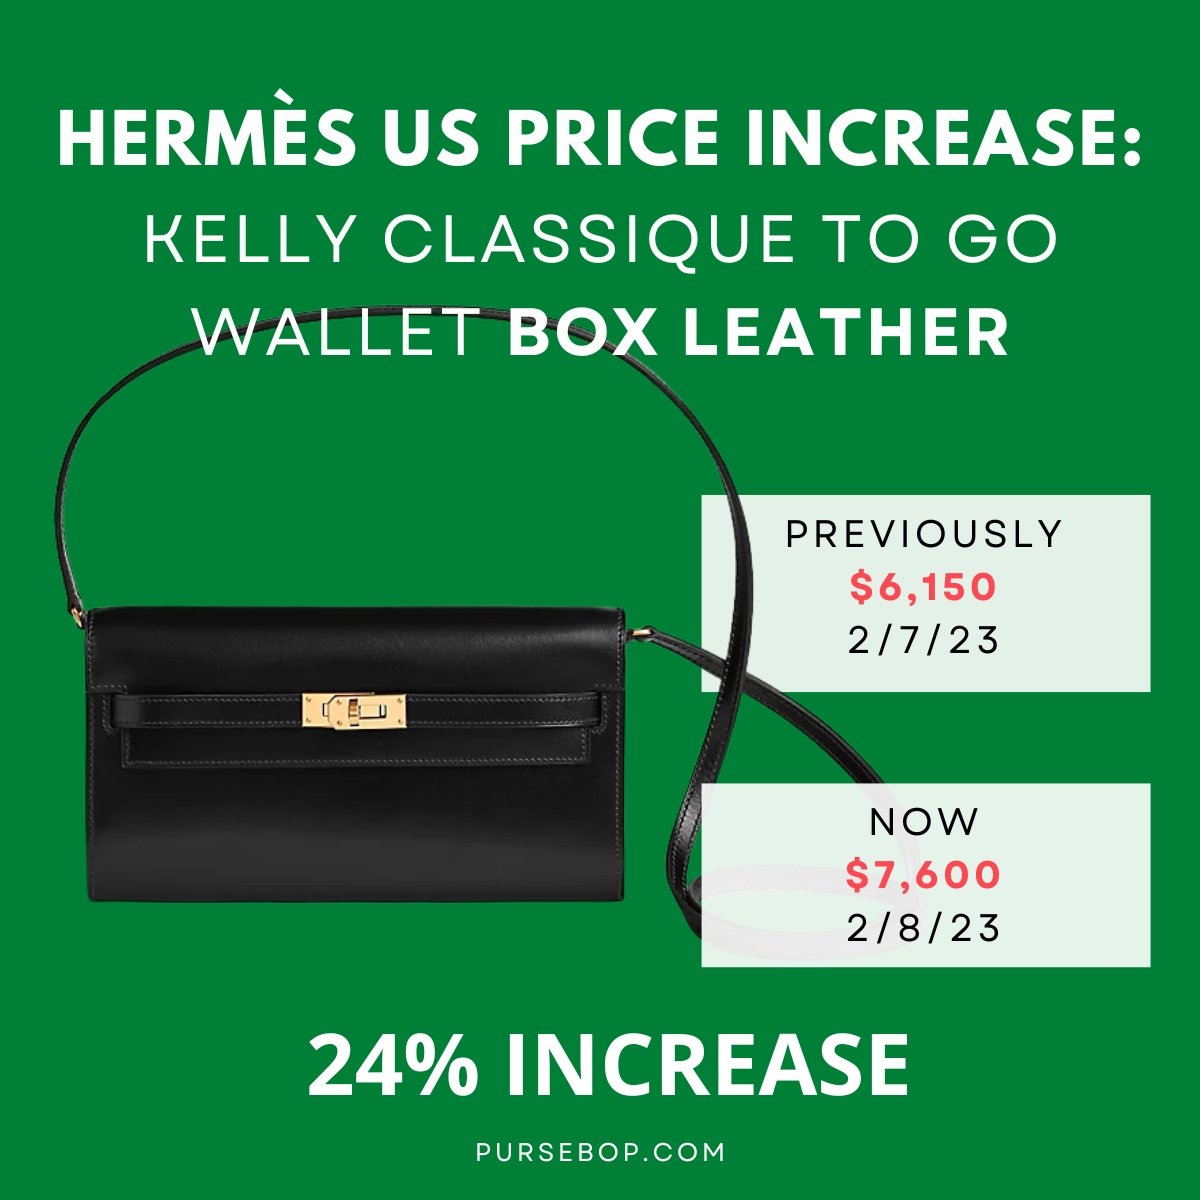 Hermes price increase🚨 All items will be affected (including